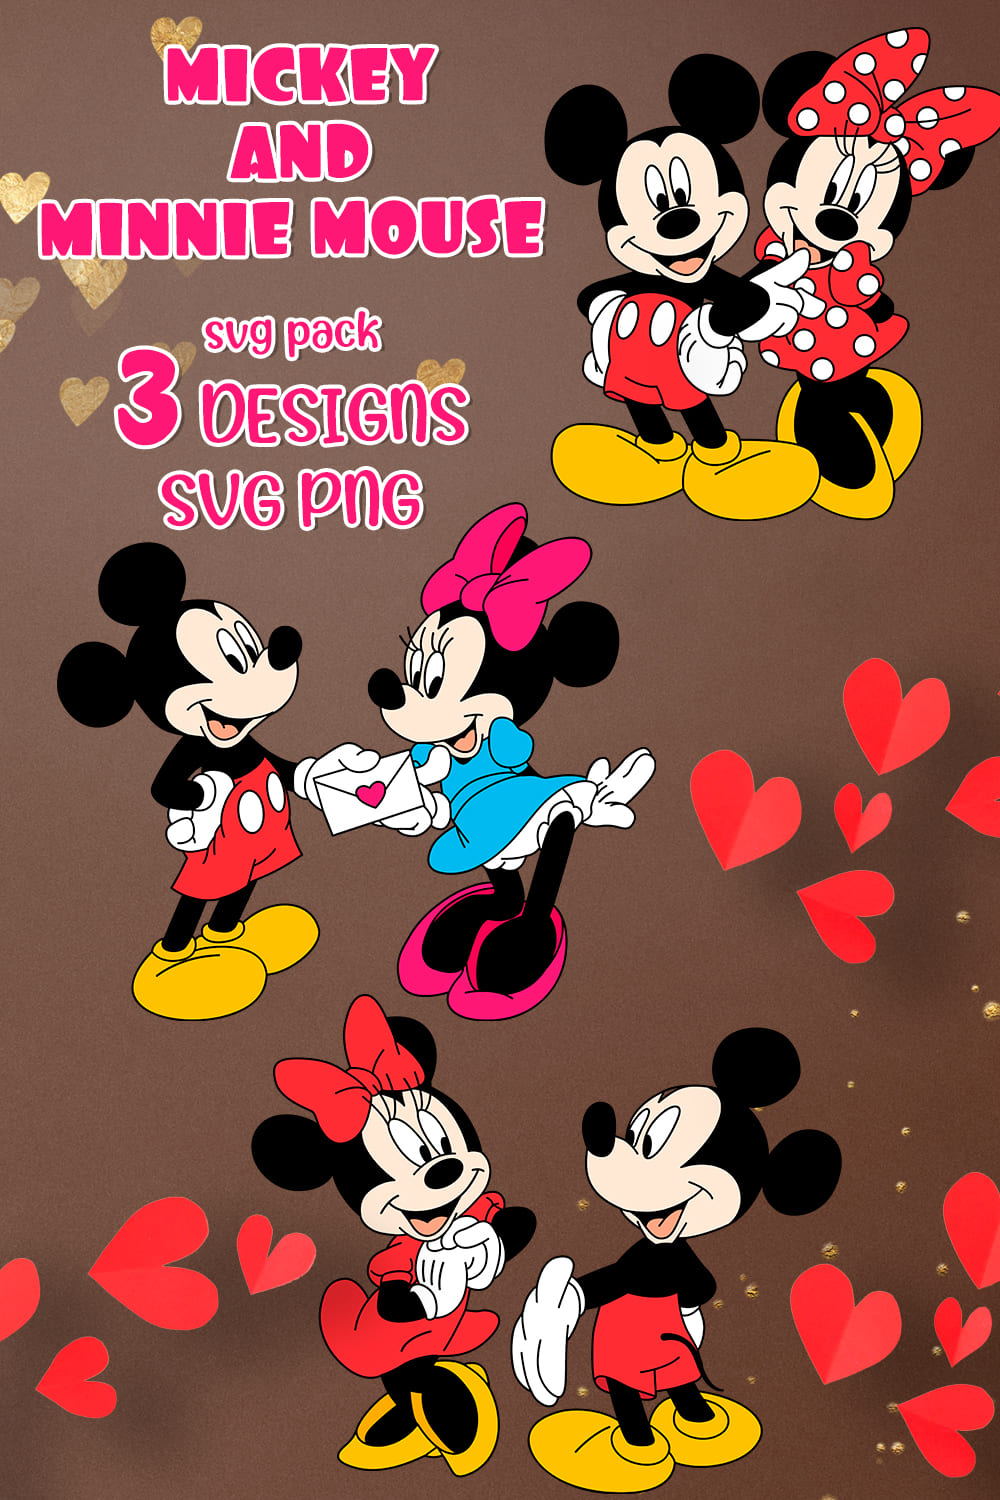 Mickey And Minnie Mouse Svg - Pinterest.